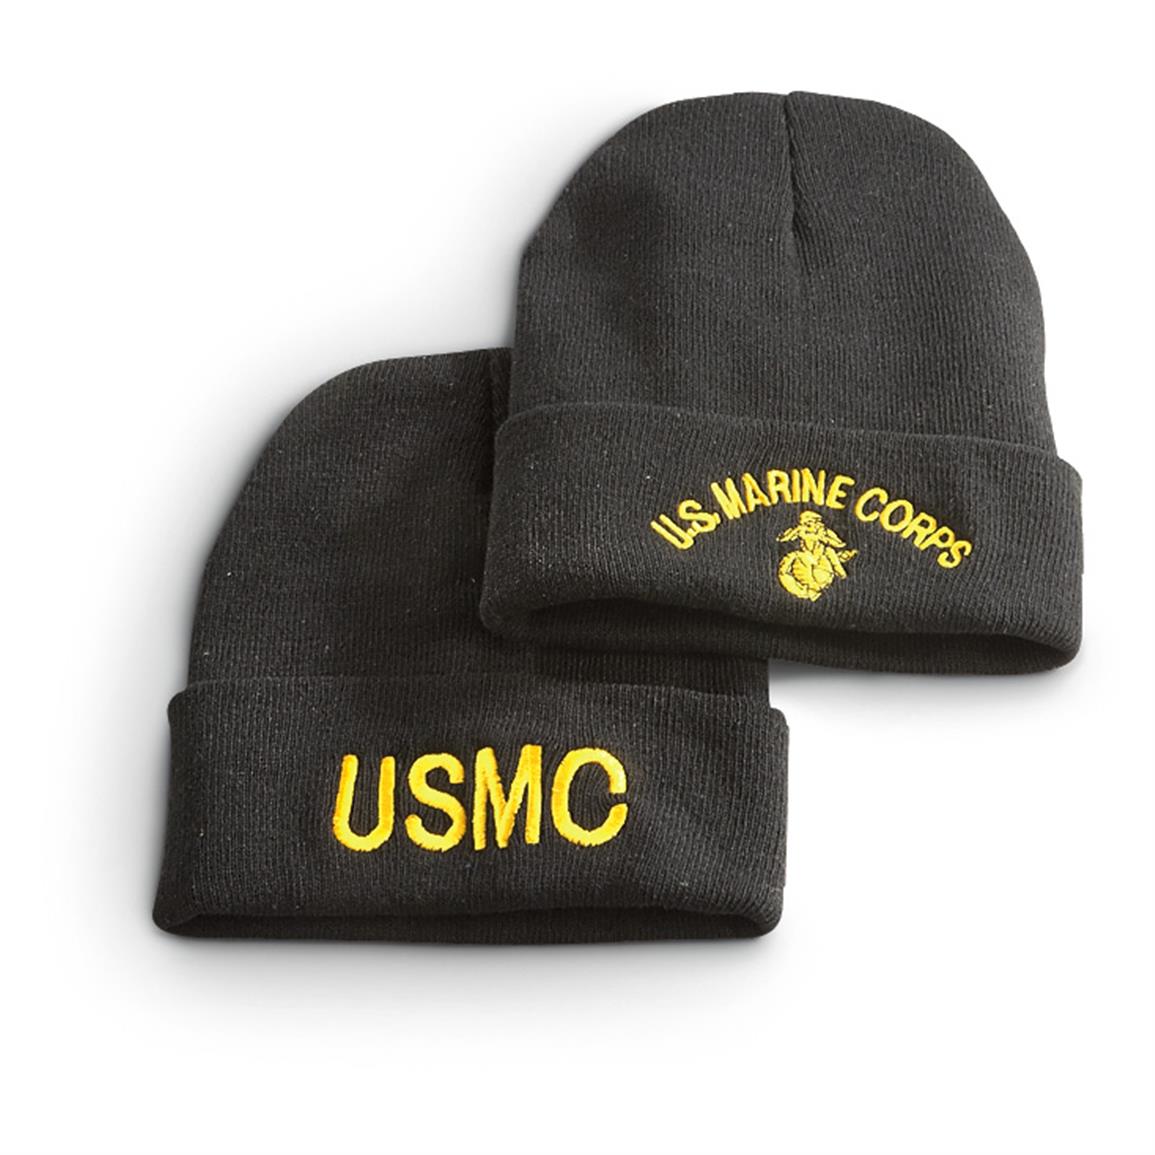 Military Surplus Embroidered Knit Caps, 2 Pack, USMC, Marines